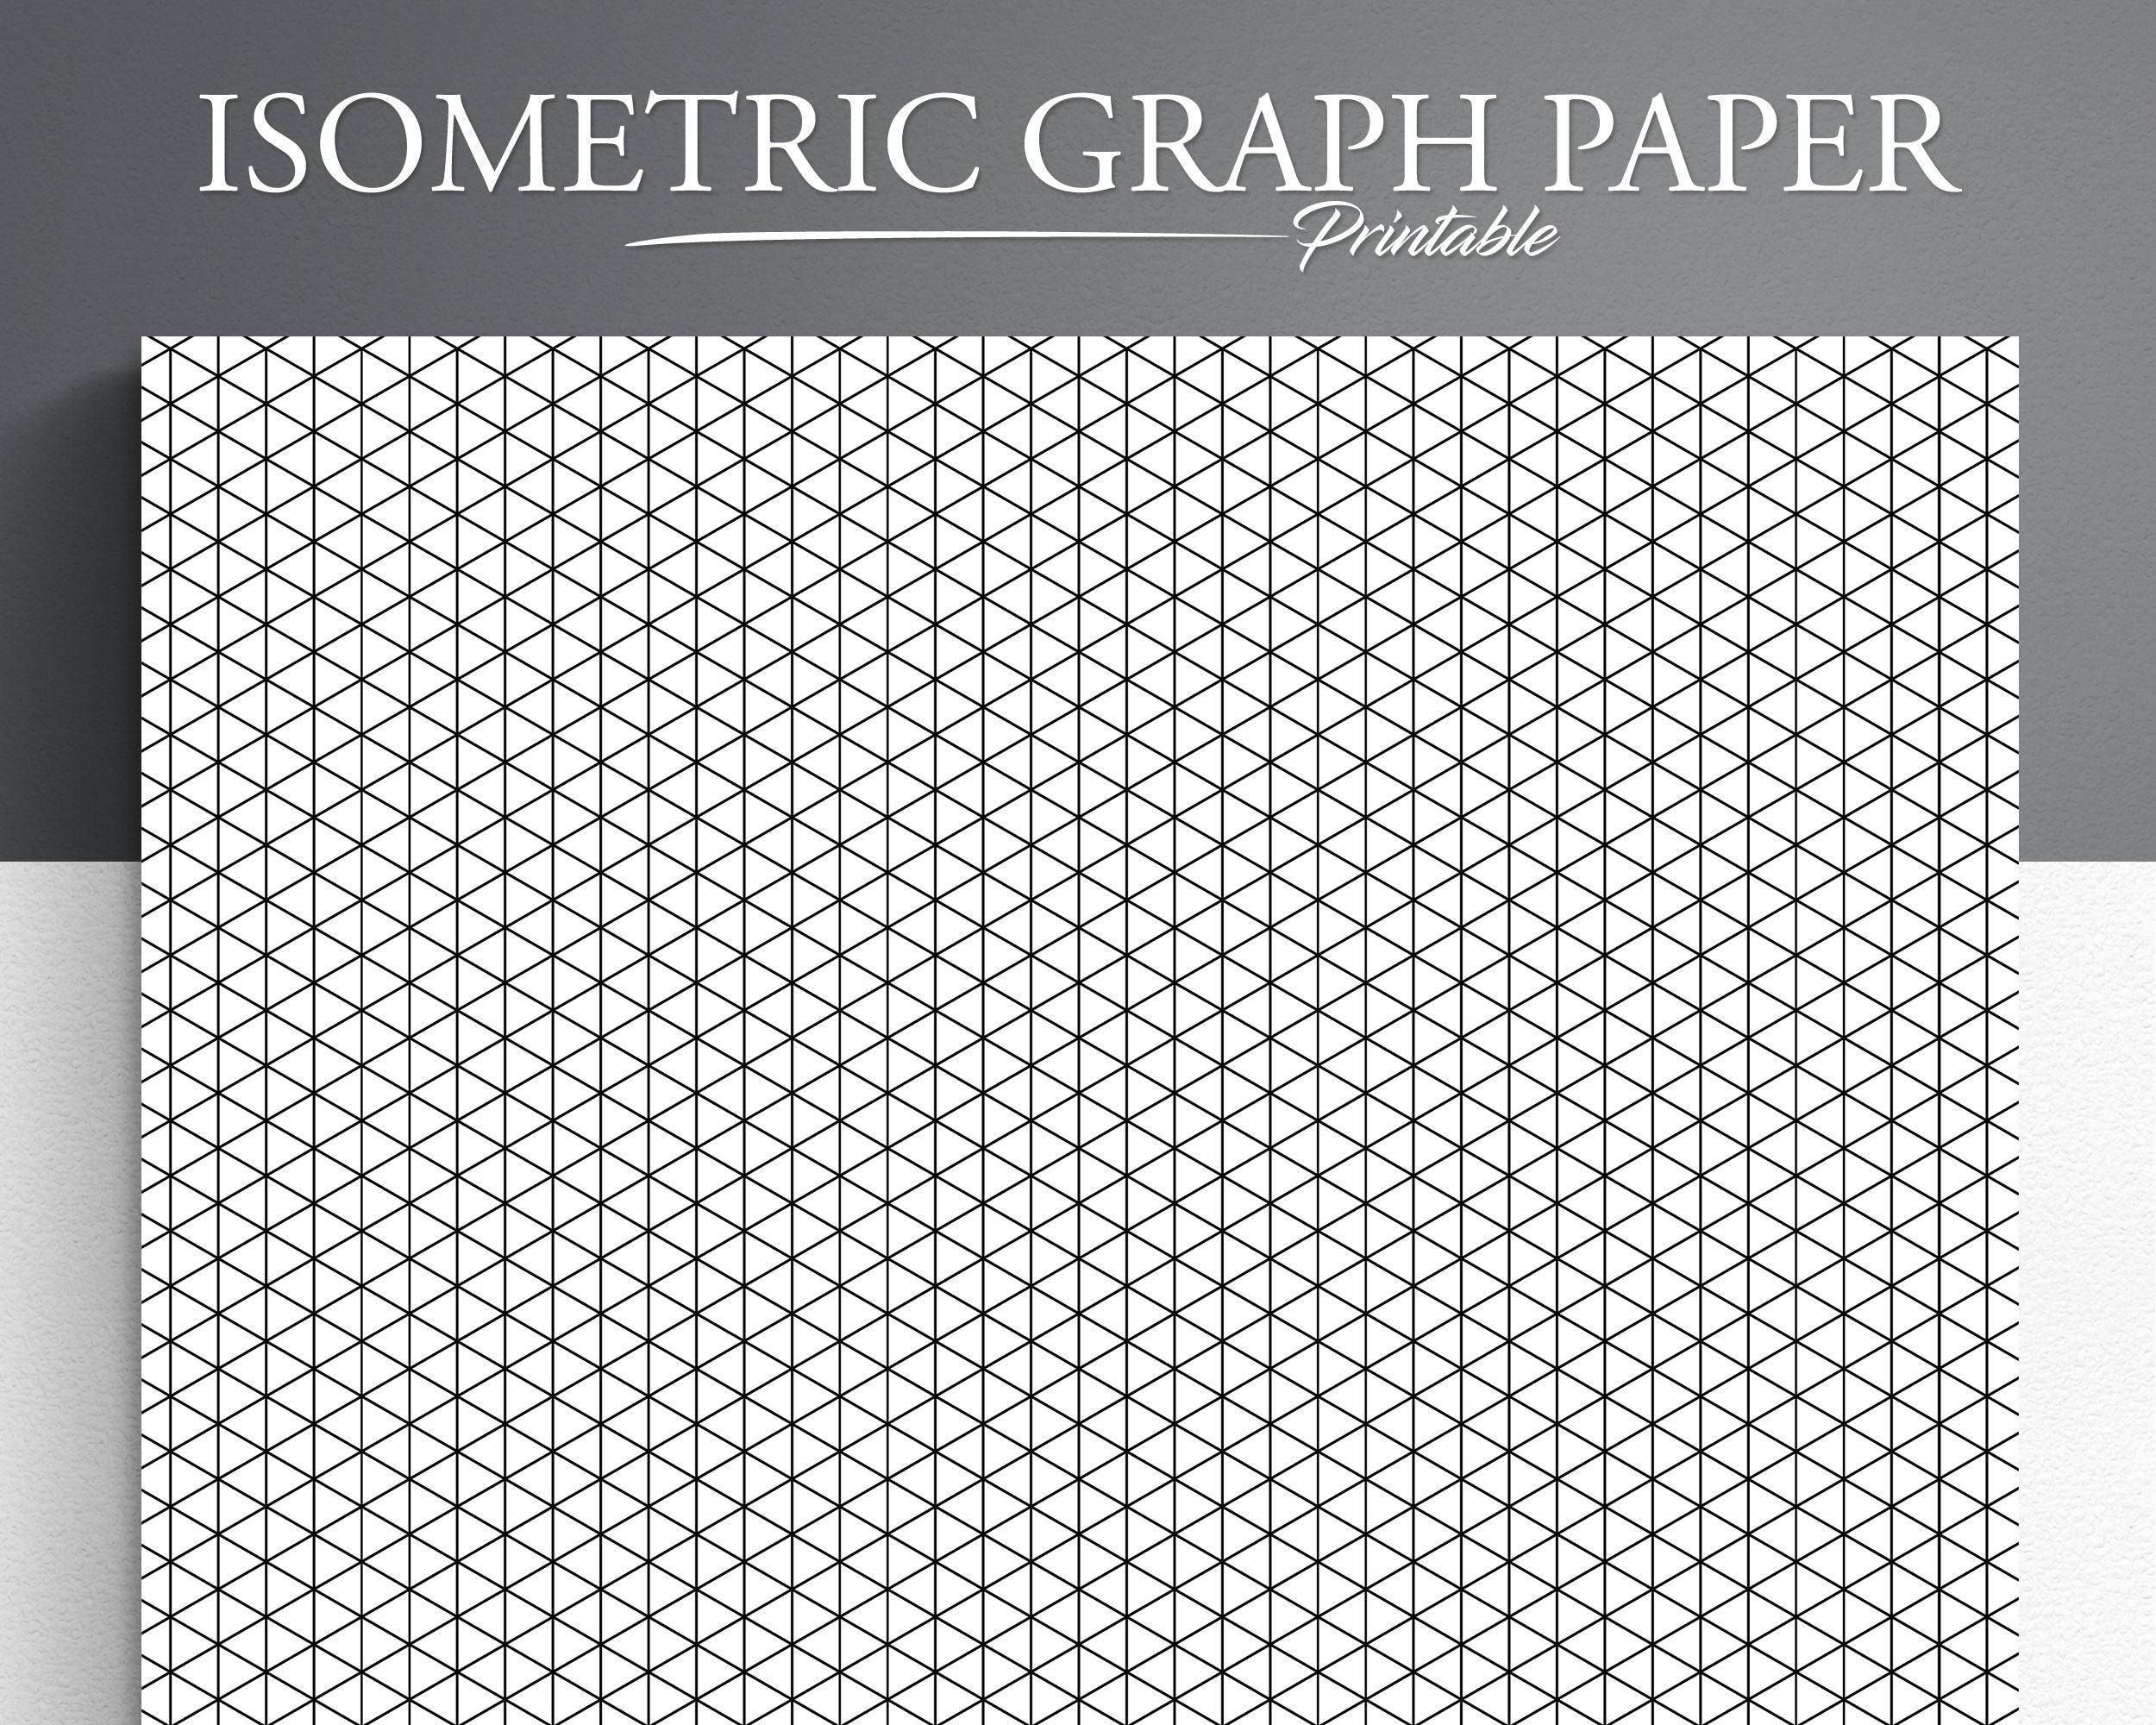 10 Pack of Large Sheet Format 1/4 Graph Paper 36 x 24 Blue Lines